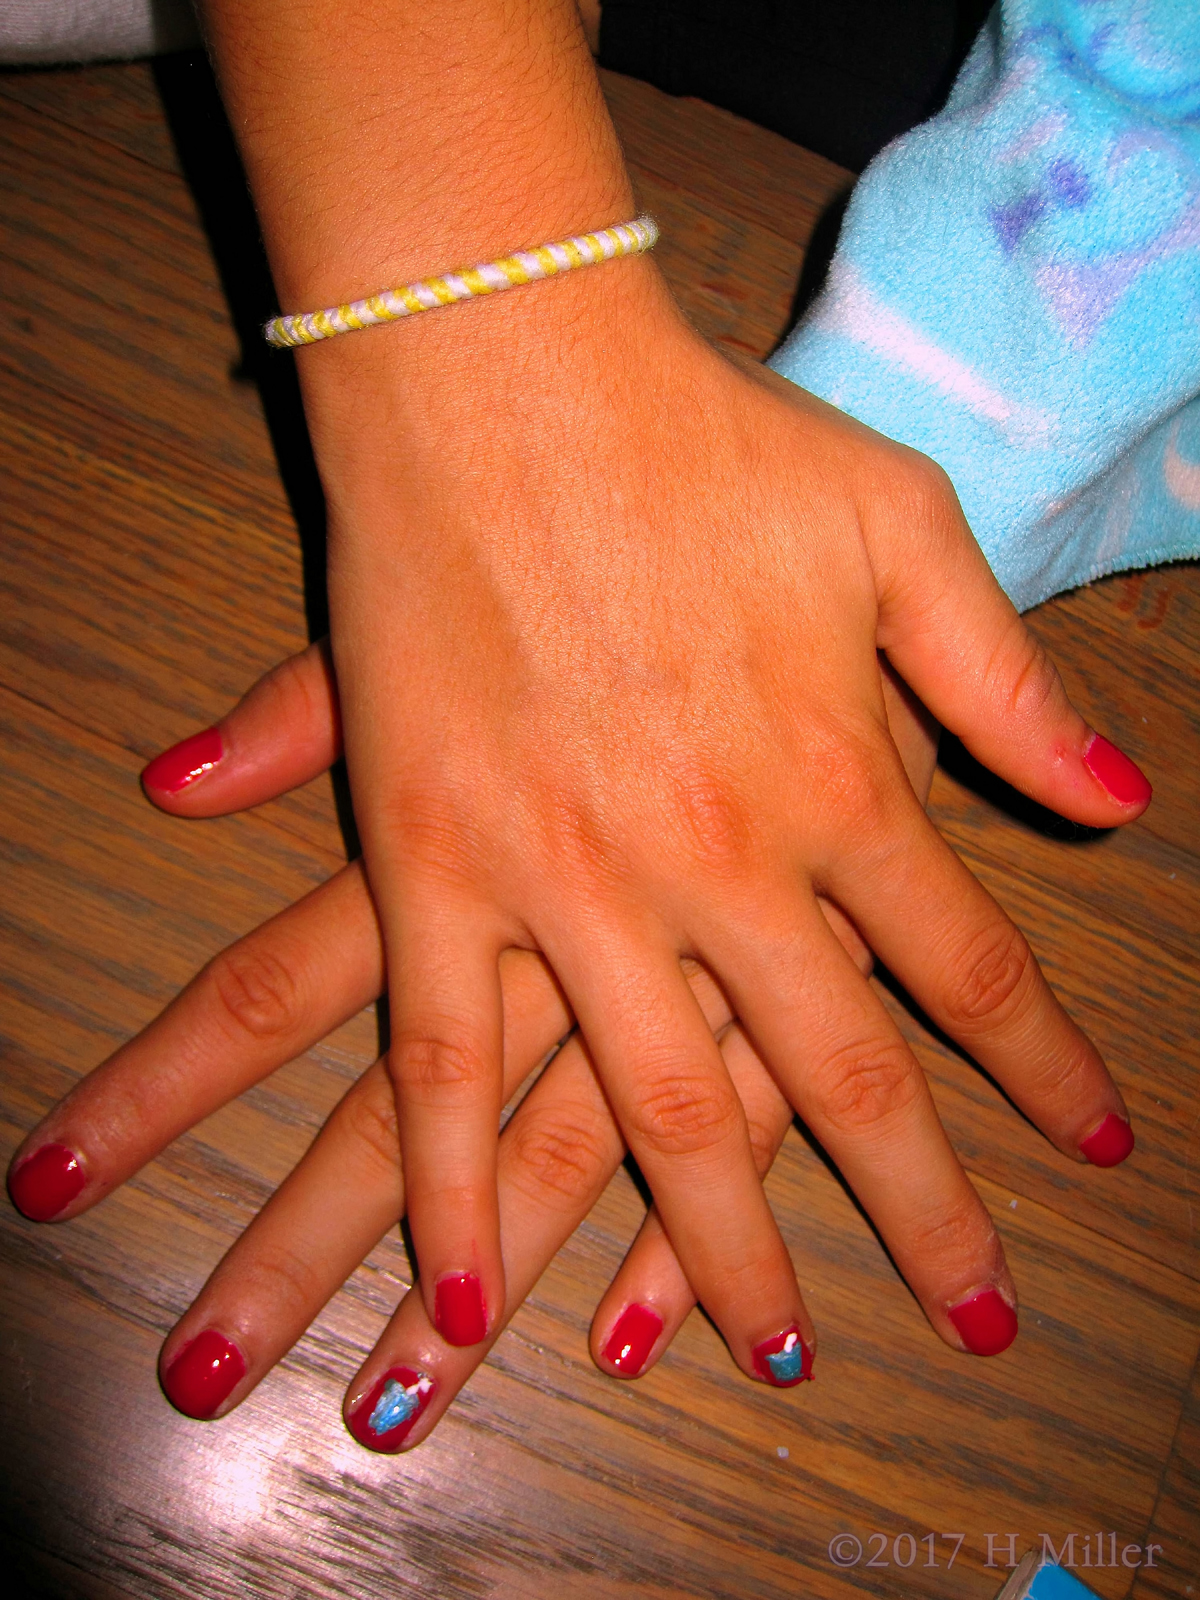 This Girls Mini Manicure With Soda Nail Art Matches Her Friends French Fries Nail Design! 